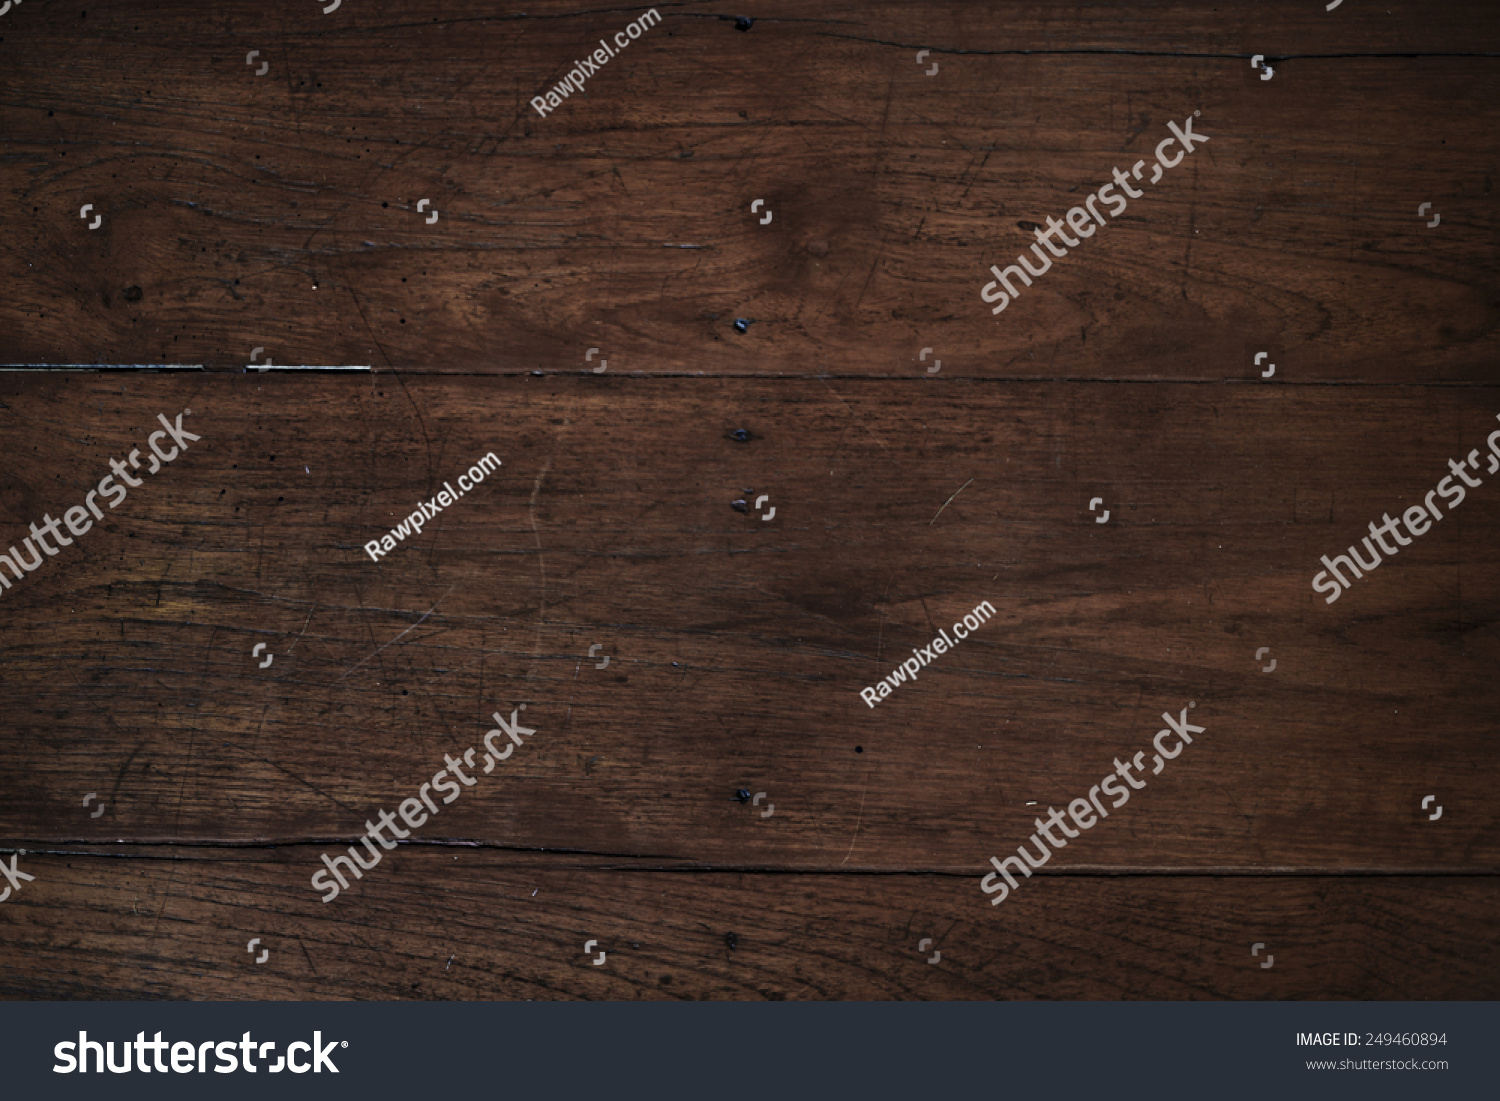 Wooden Wall Scratched Material Background Texture Concept #249460894